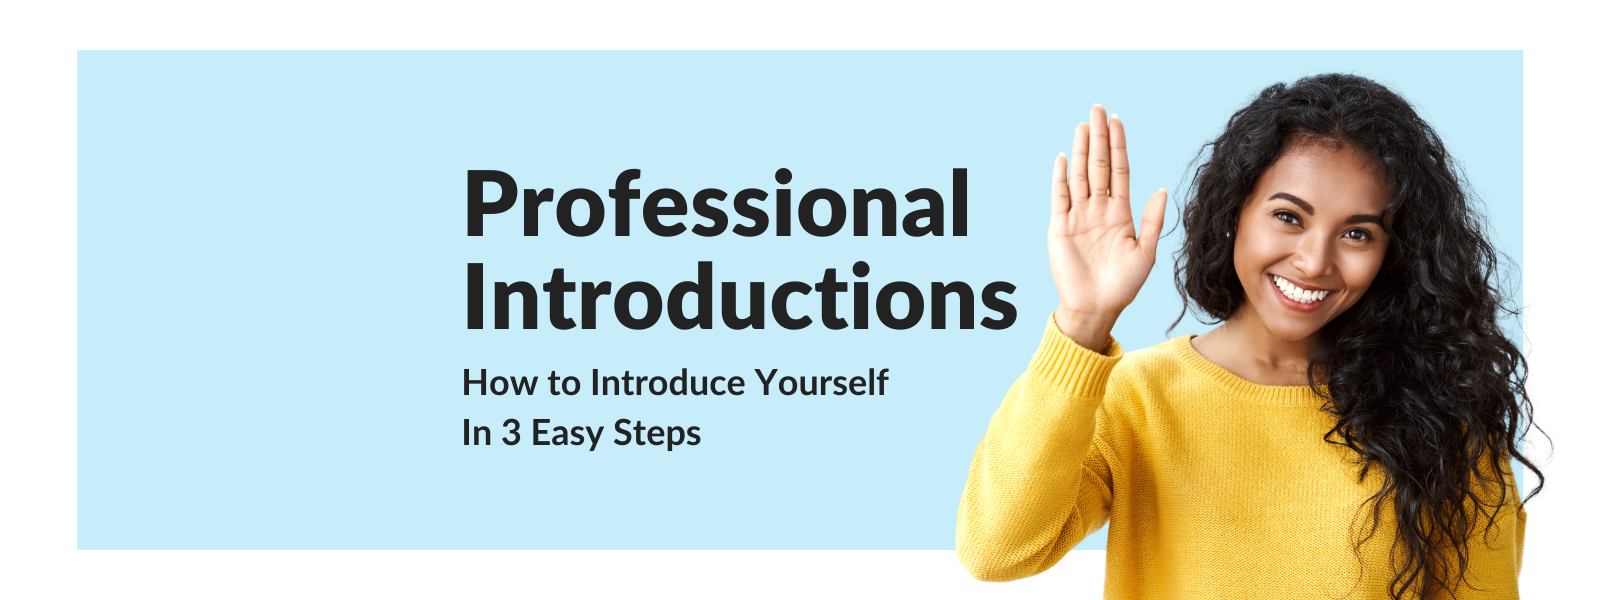 How To Introduce Yourself Professionally - Talaera Business English